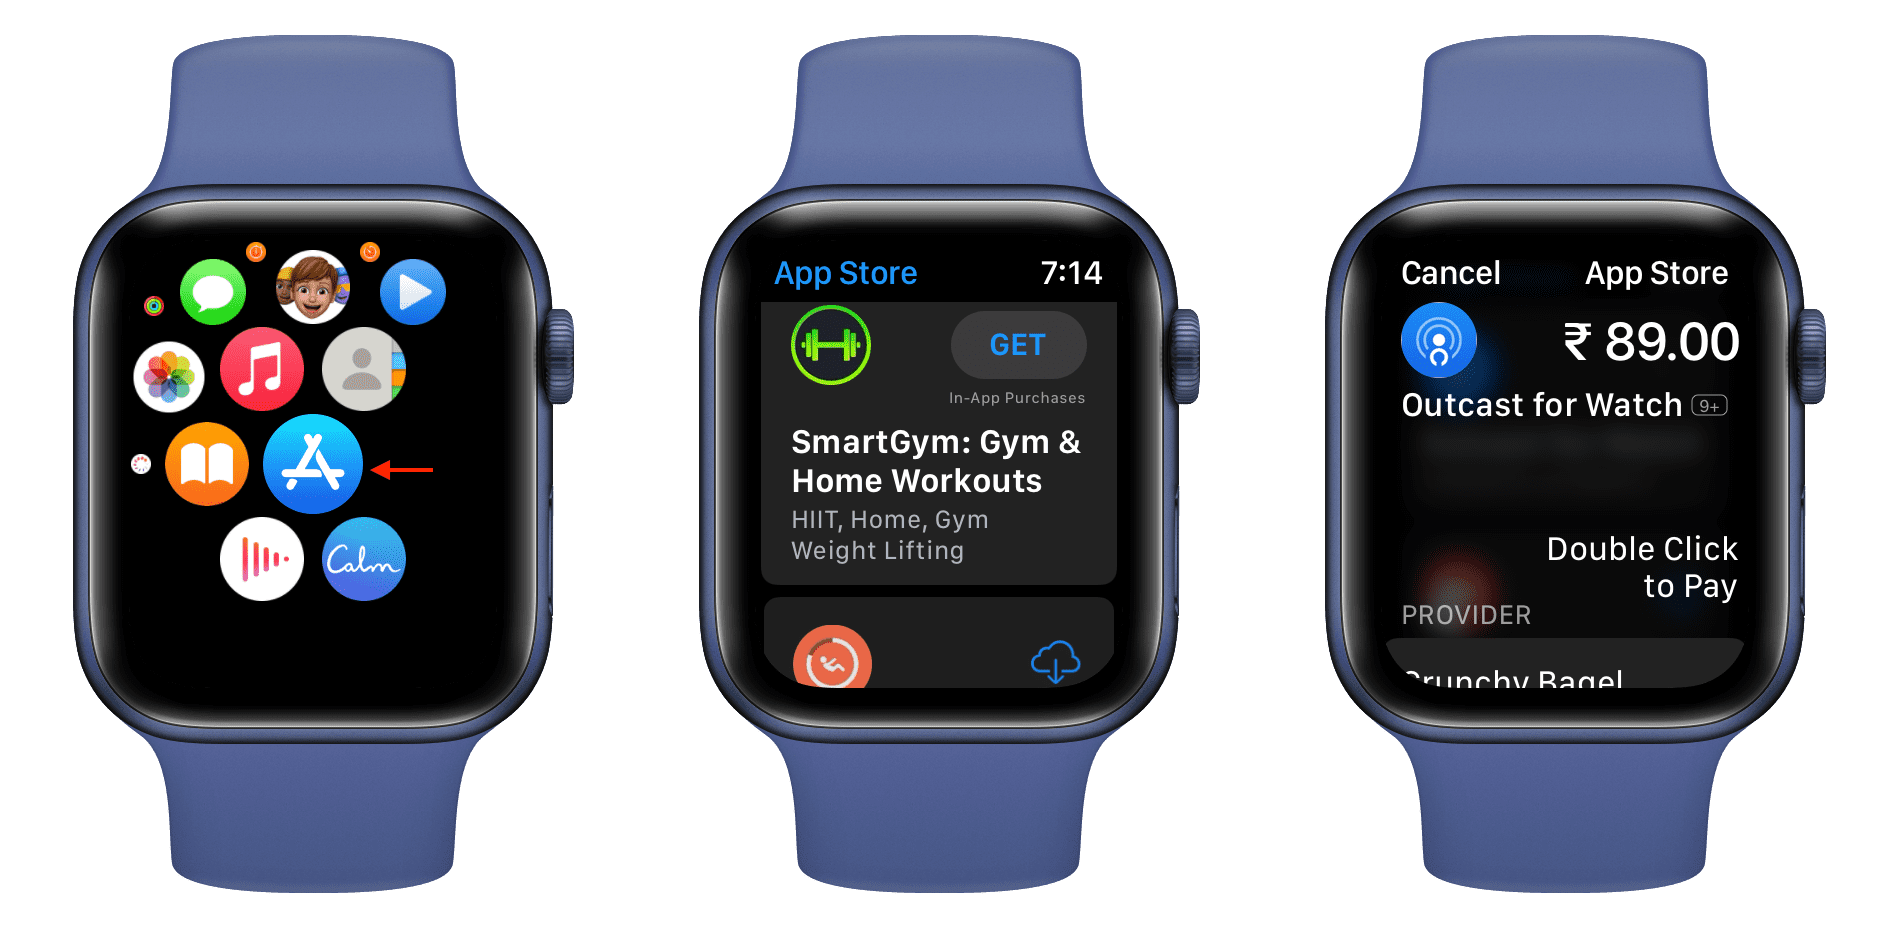 Install app on Apple Watch from its App Store